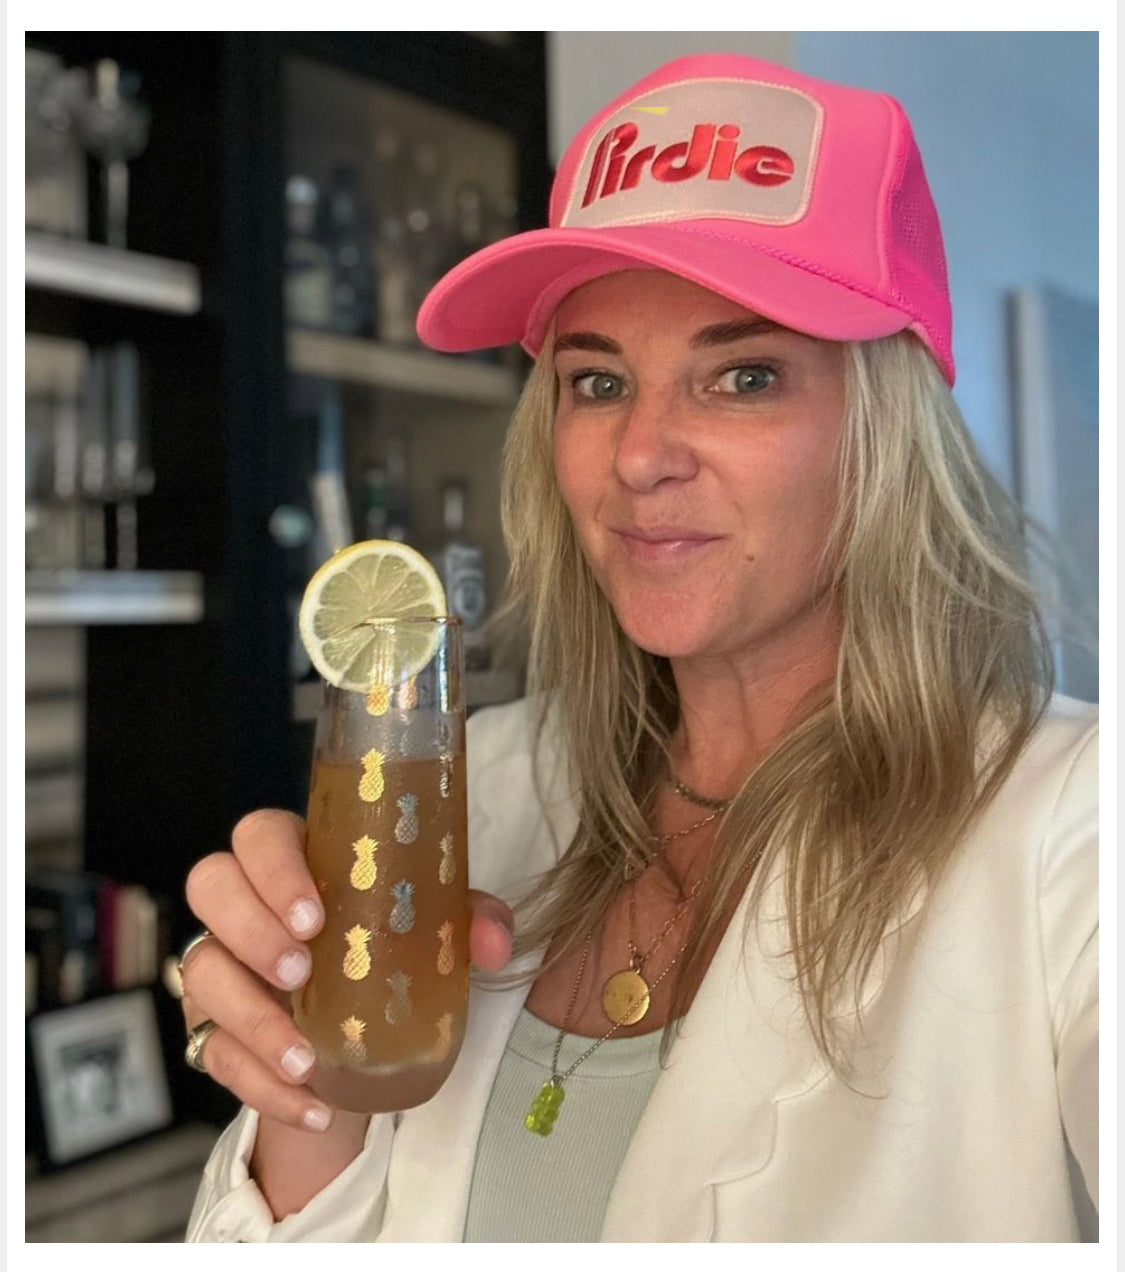 From the Course to Cocktails - Meet the June Daly